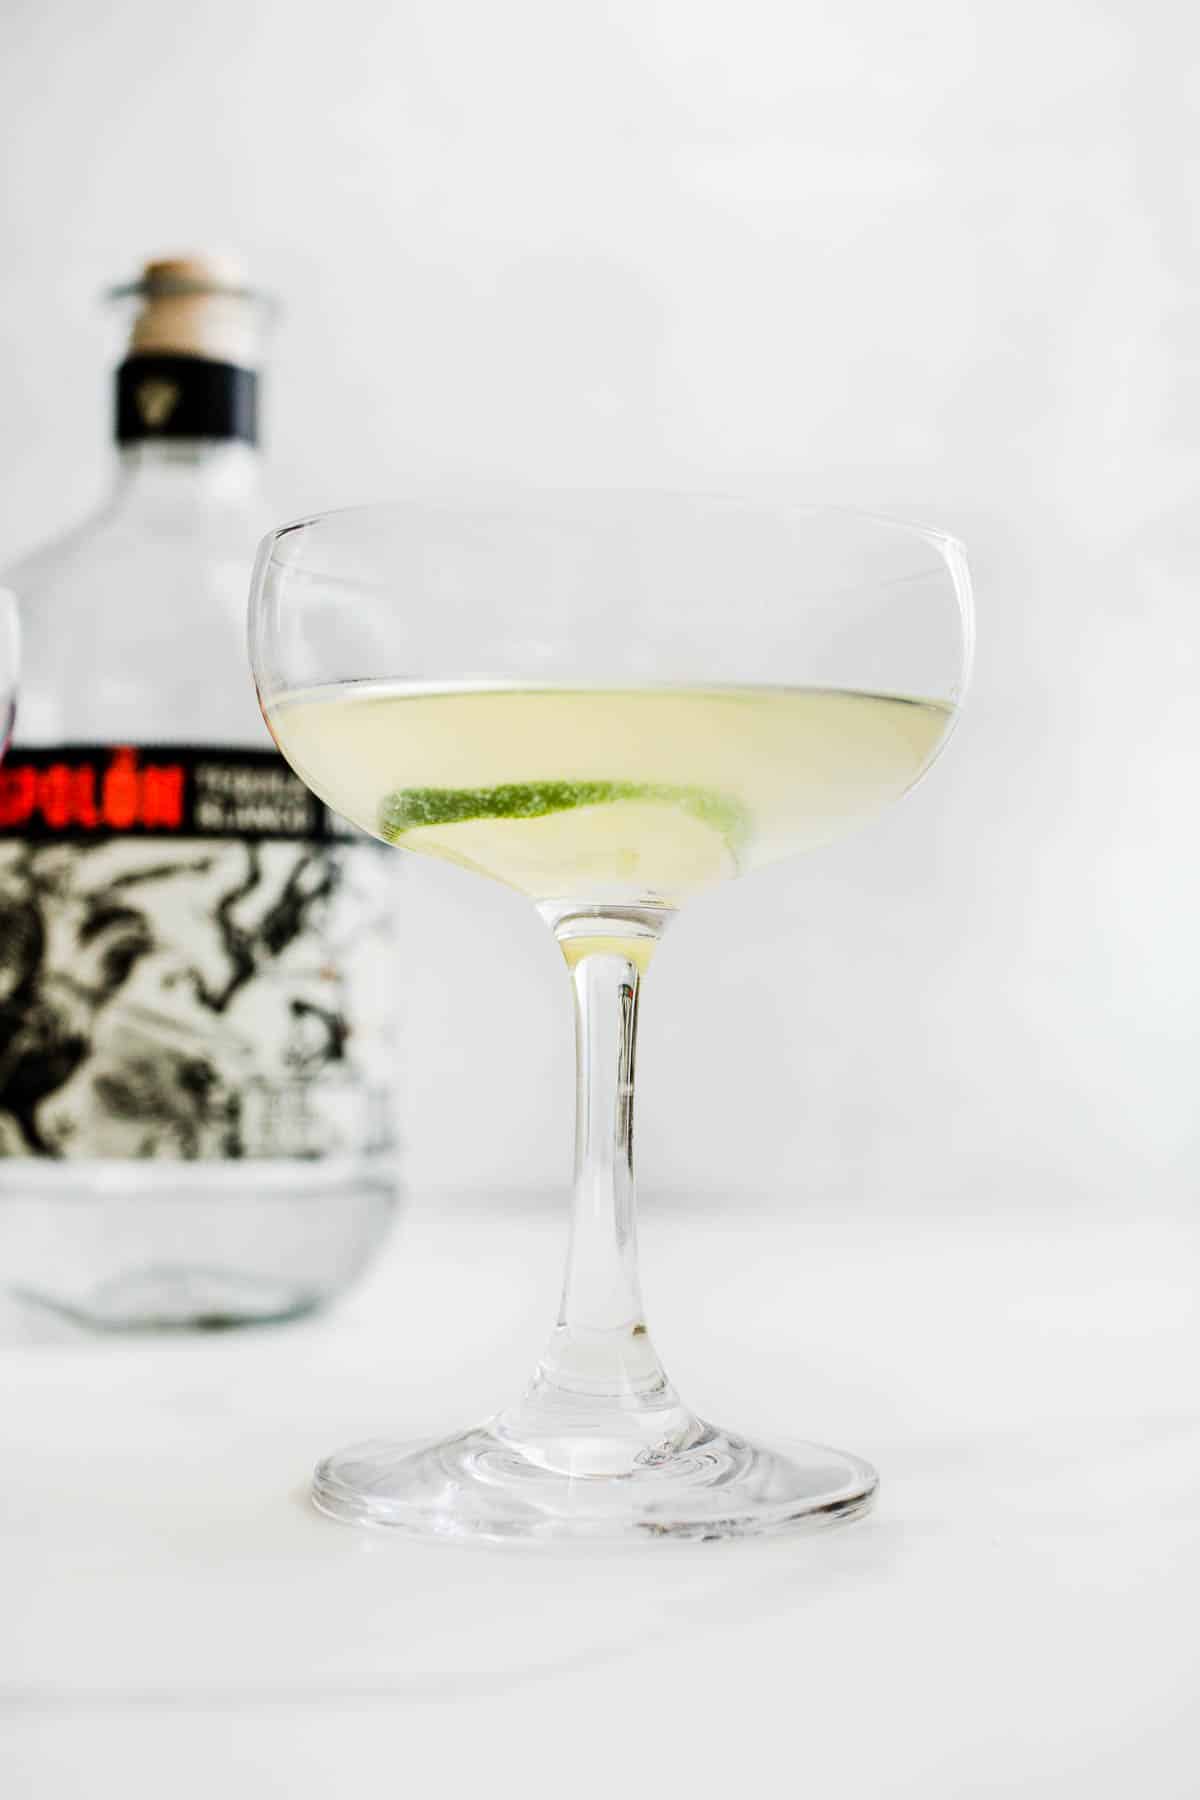 A tequila gimlet in a coupe cocktail glass with a lime wheel as garnish.